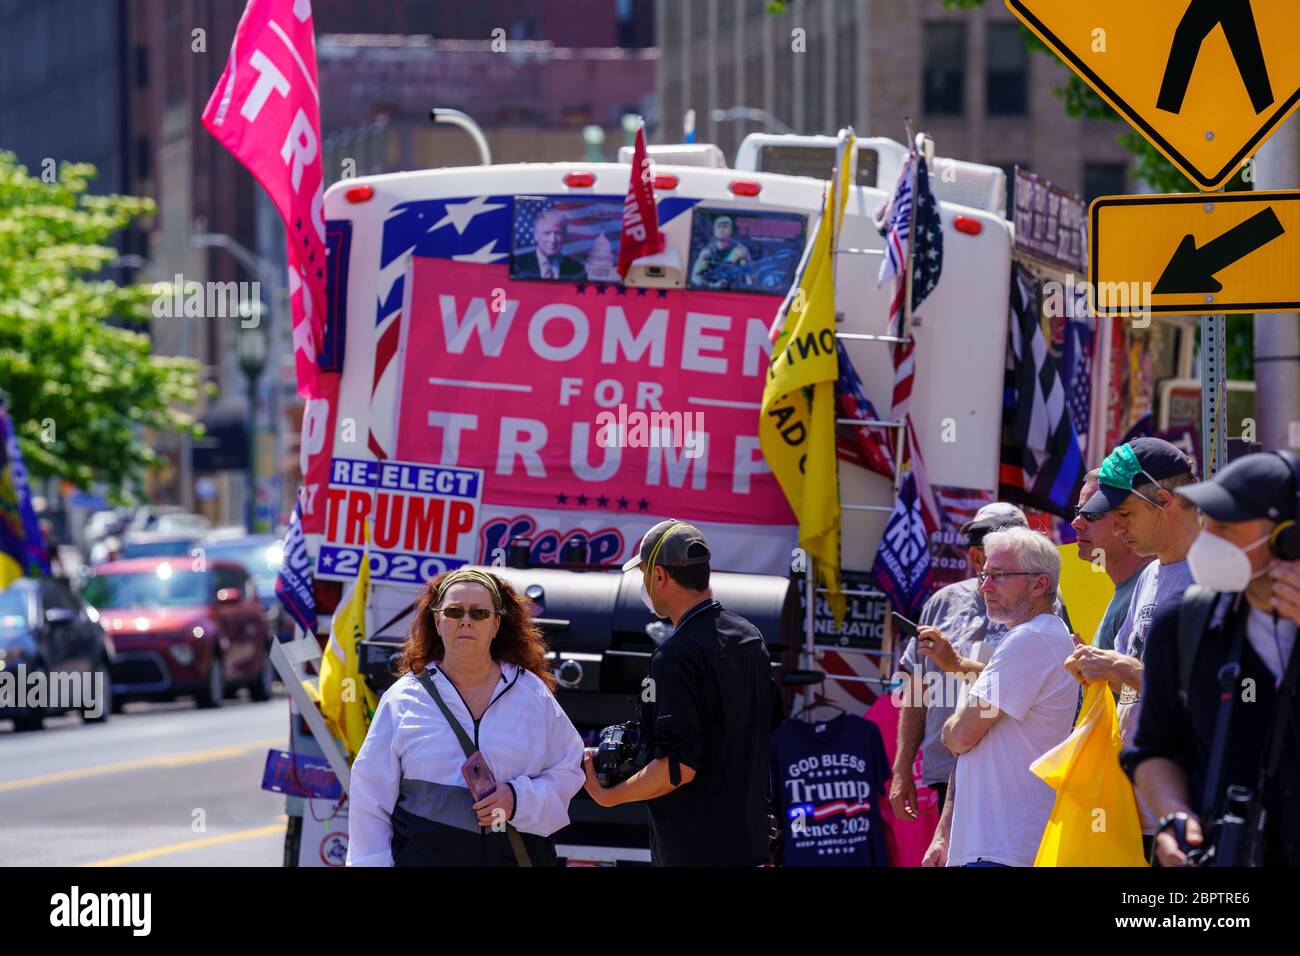 Harrisburg, PA / USA - May 15, 2020: A large RV parked along a street at the capitol building displays Trump 2020 campaign signs. Stock Photo